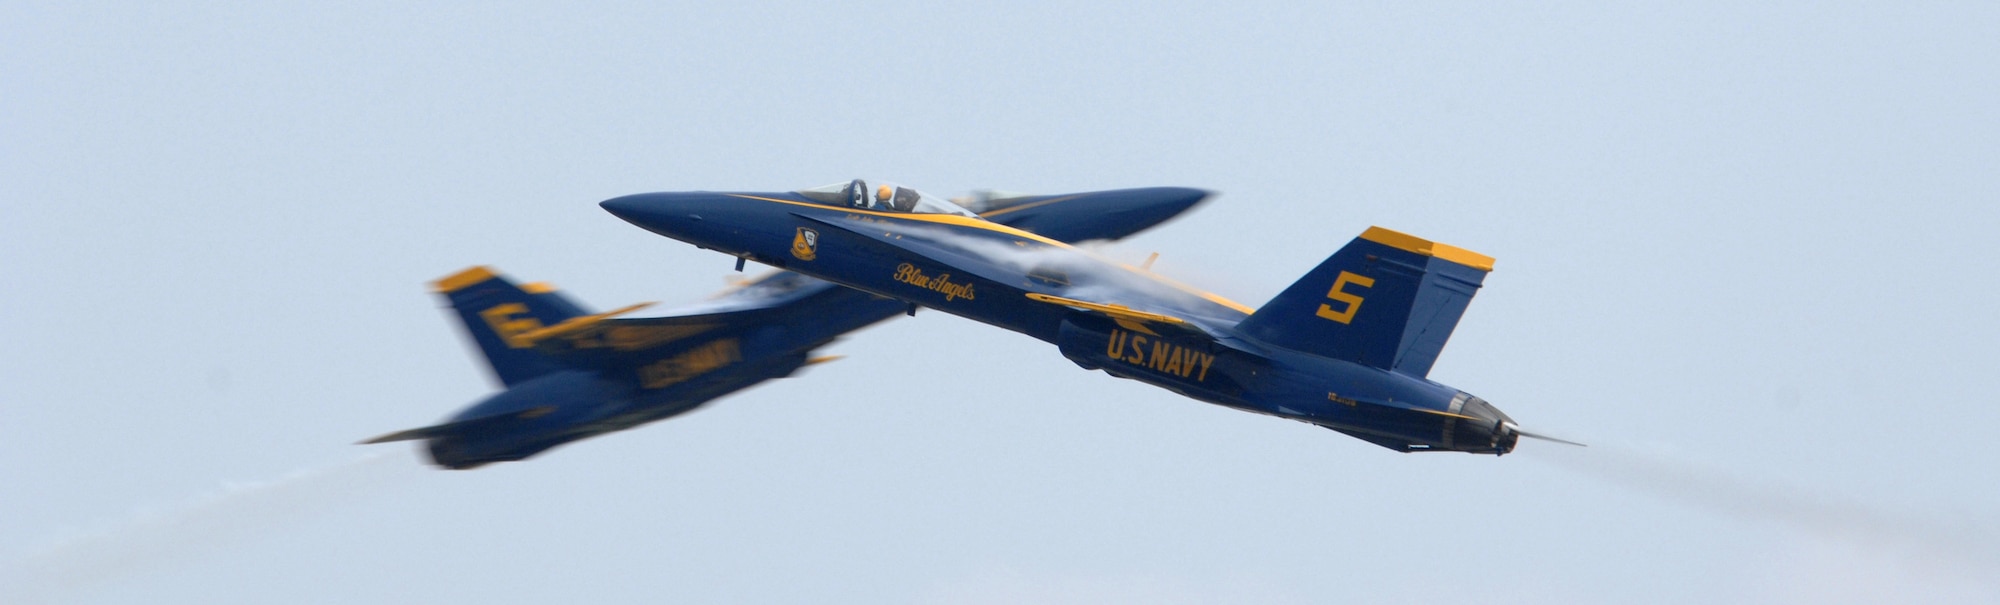 The U.S. Navy Blue Angels perform at the 2007 Wings Over Wayne Airshow here May 12. The Wings Over Wayne Airshow 2007 is the first apperance of the Blue Angels since the accident that occurred April 21.(U.S. Air Force photo by Airman 1st Class Greg Biondo)(released)